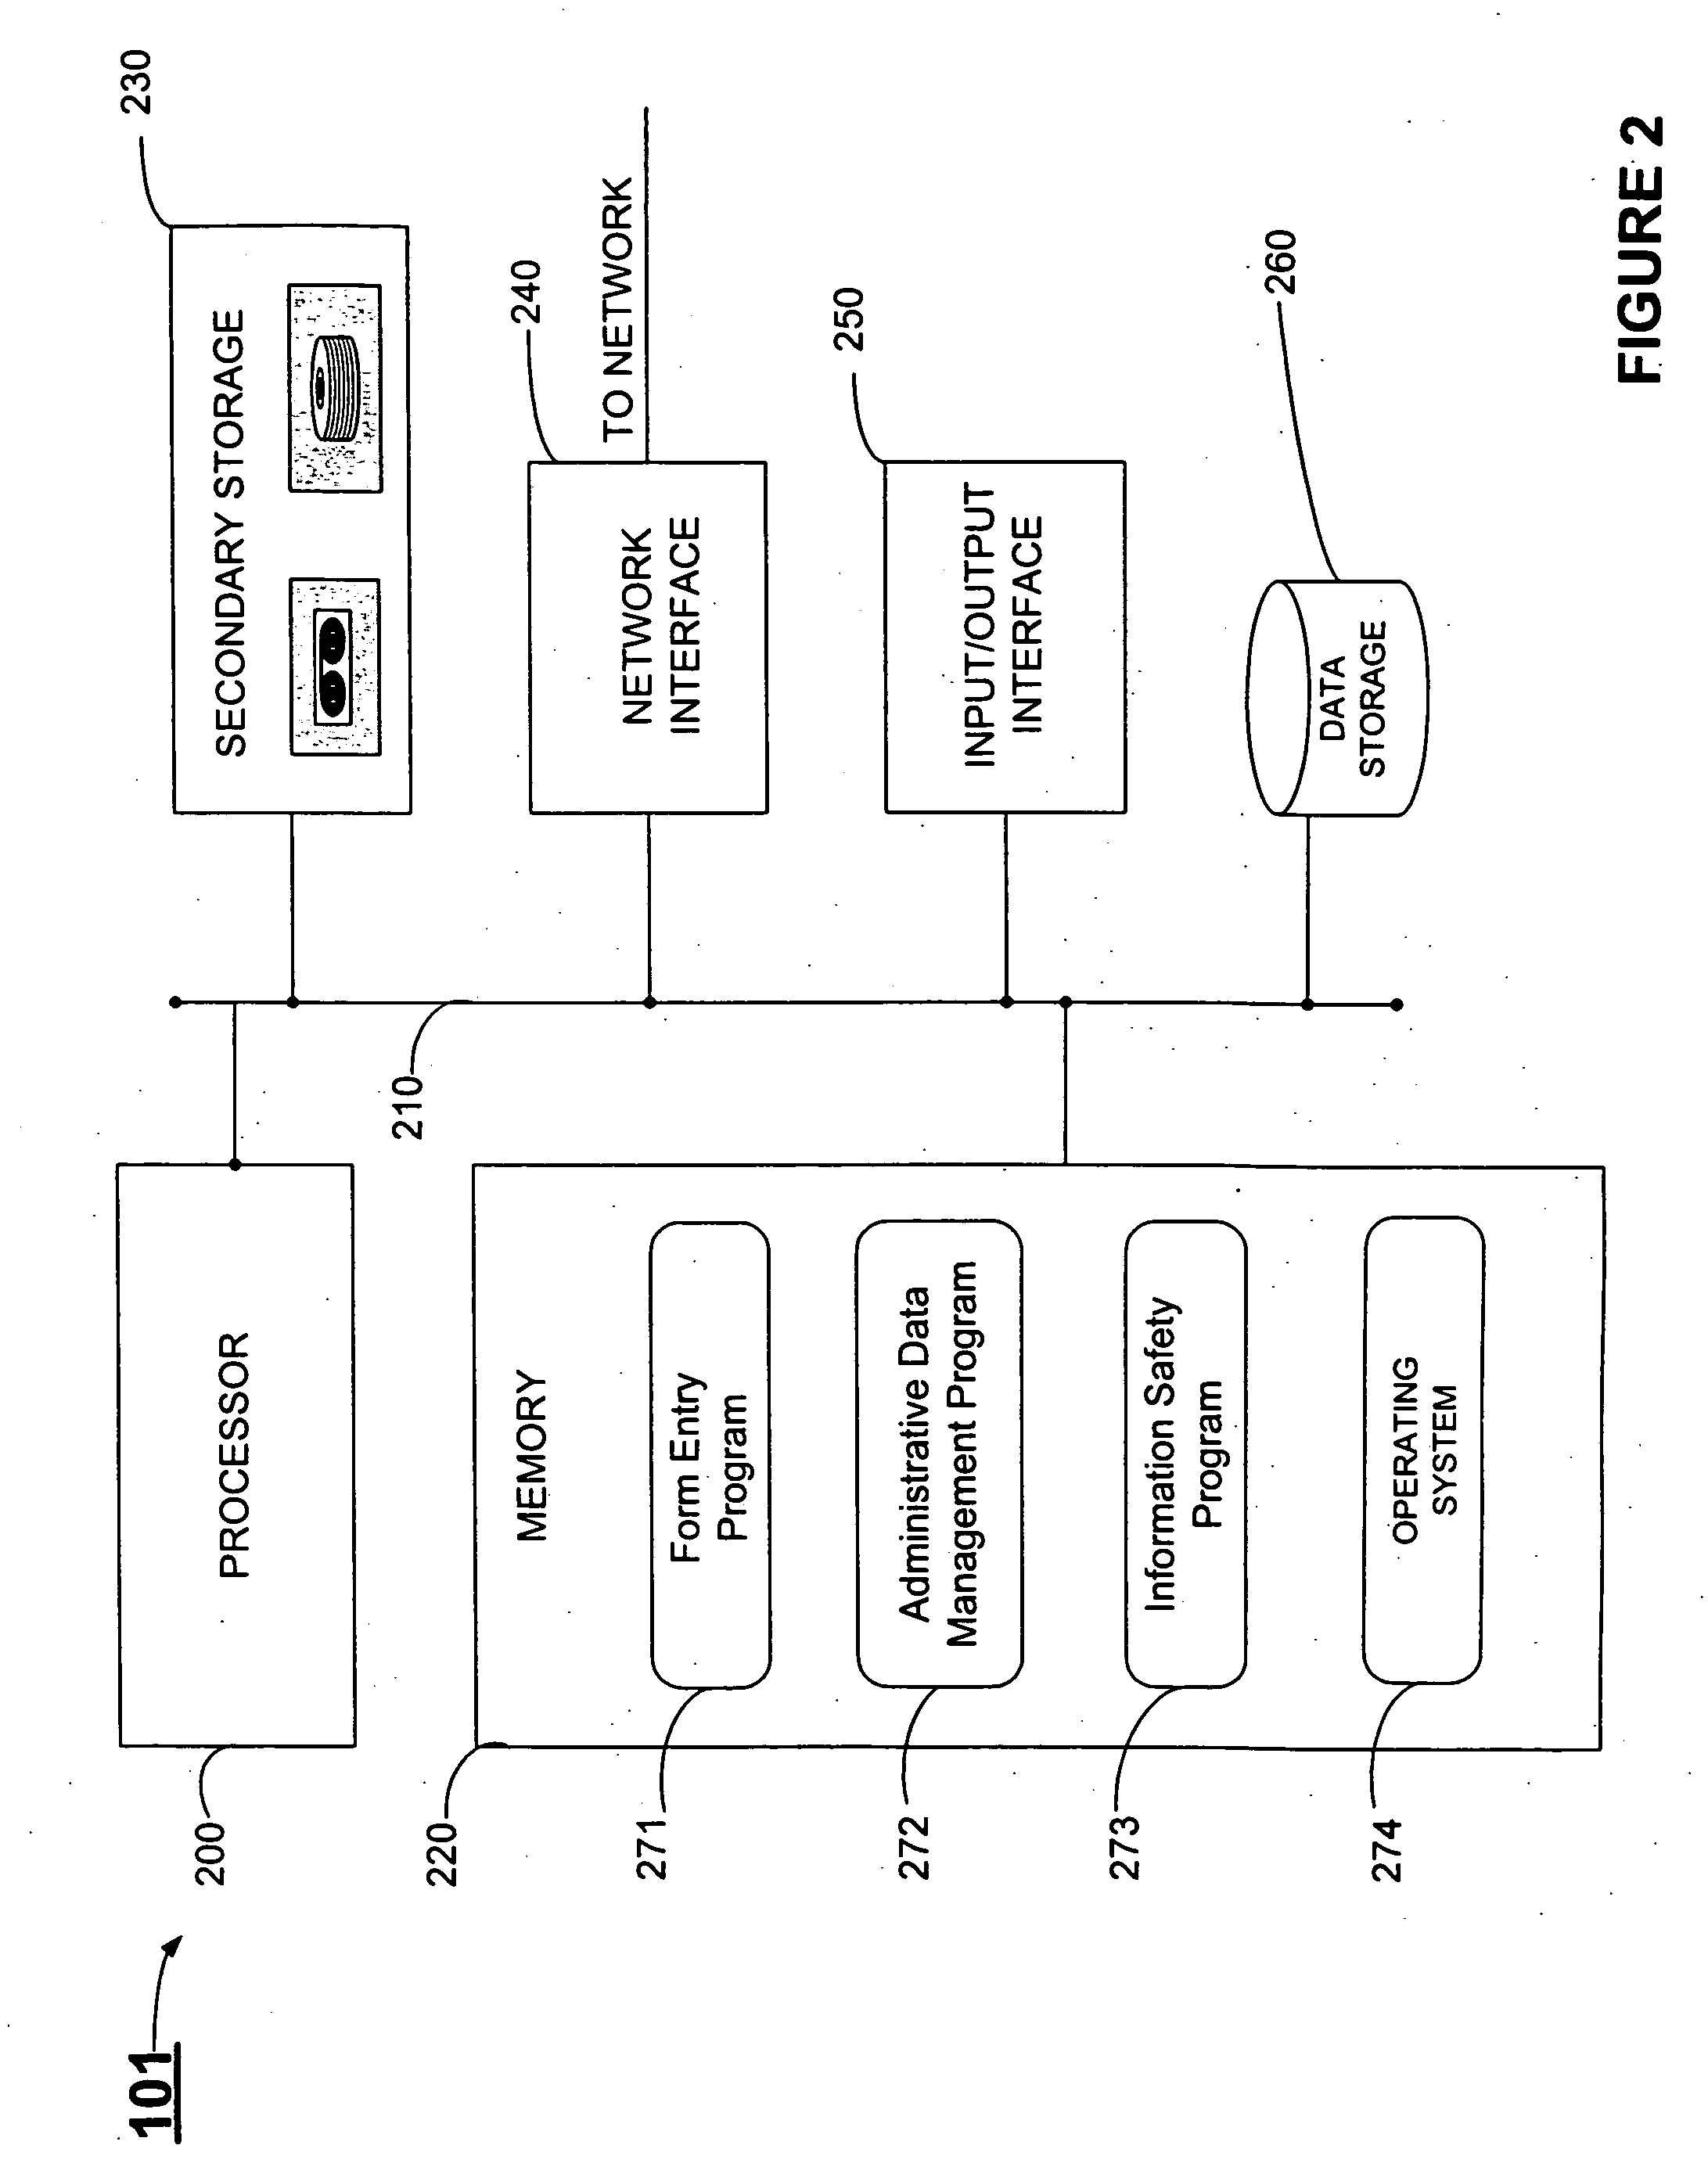 Systems and methods for storing personal information, automatically filling out forms, and sharing information with a data recipient